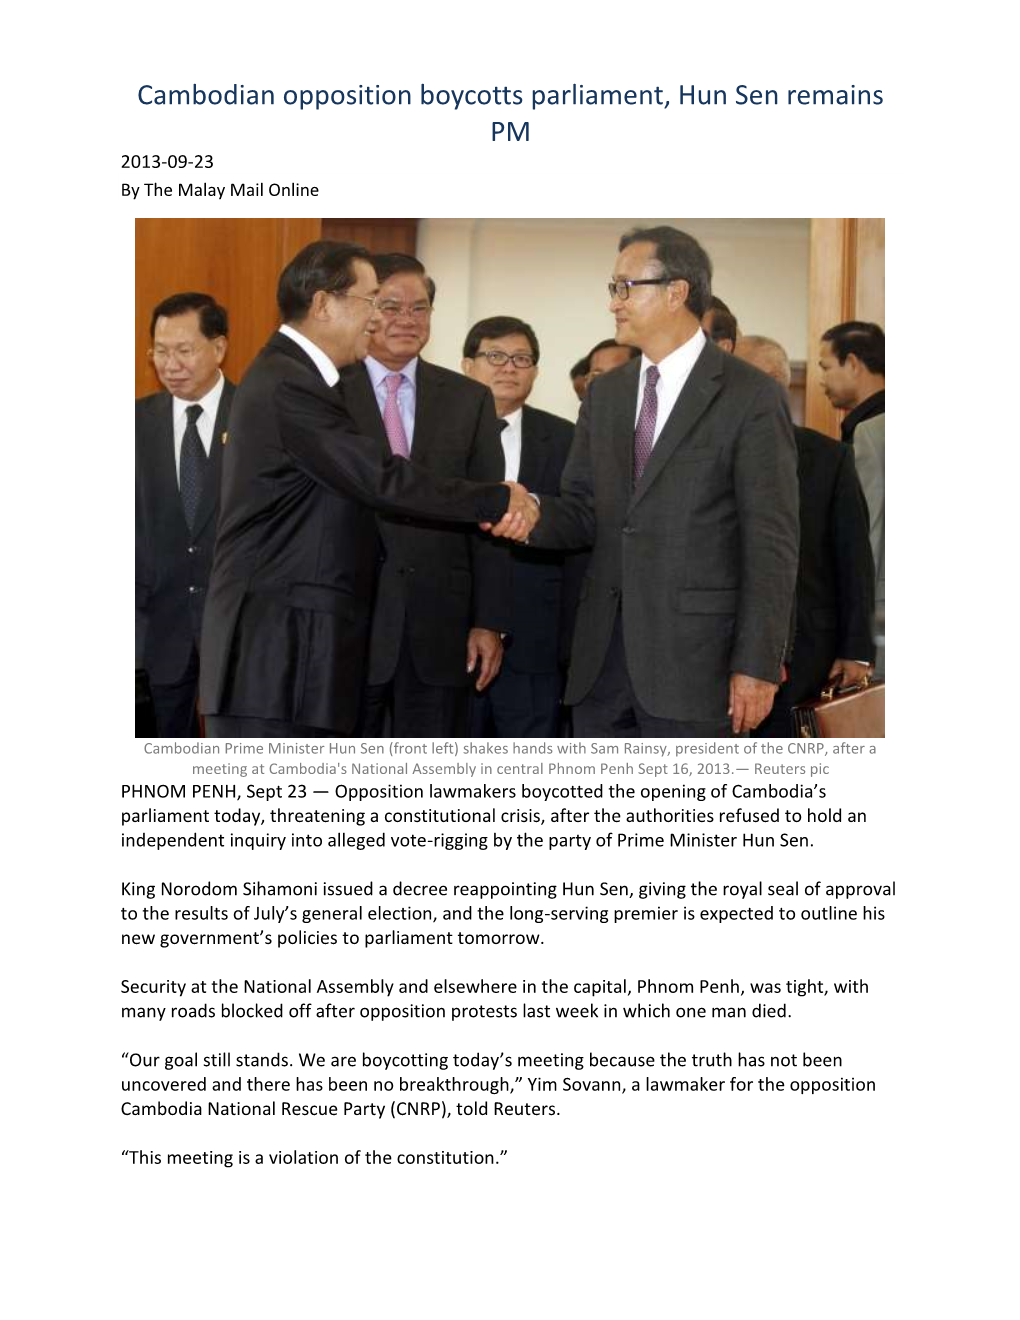 Cambodian Opposition Boycotts Parliament, Hun Sen Remains PM 2013-09-23 by the Malay Mail Online